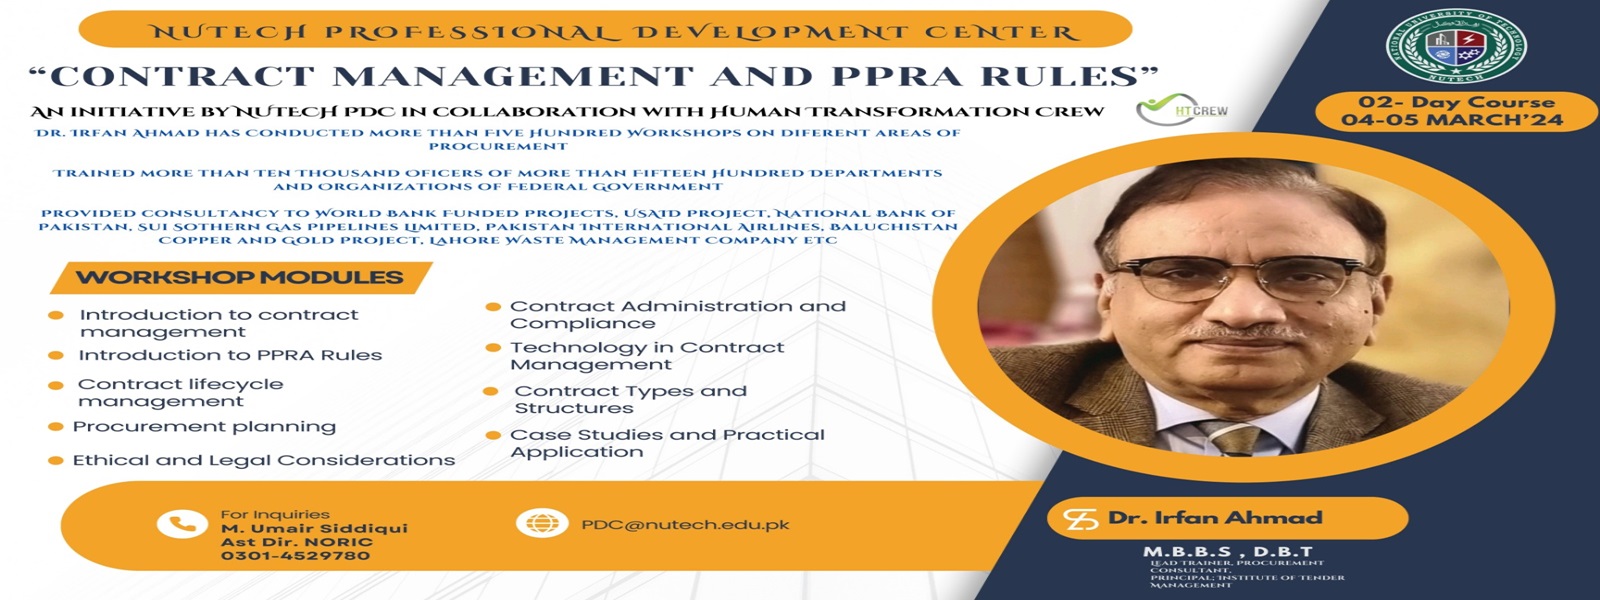 Contract Management and PPRA Rules